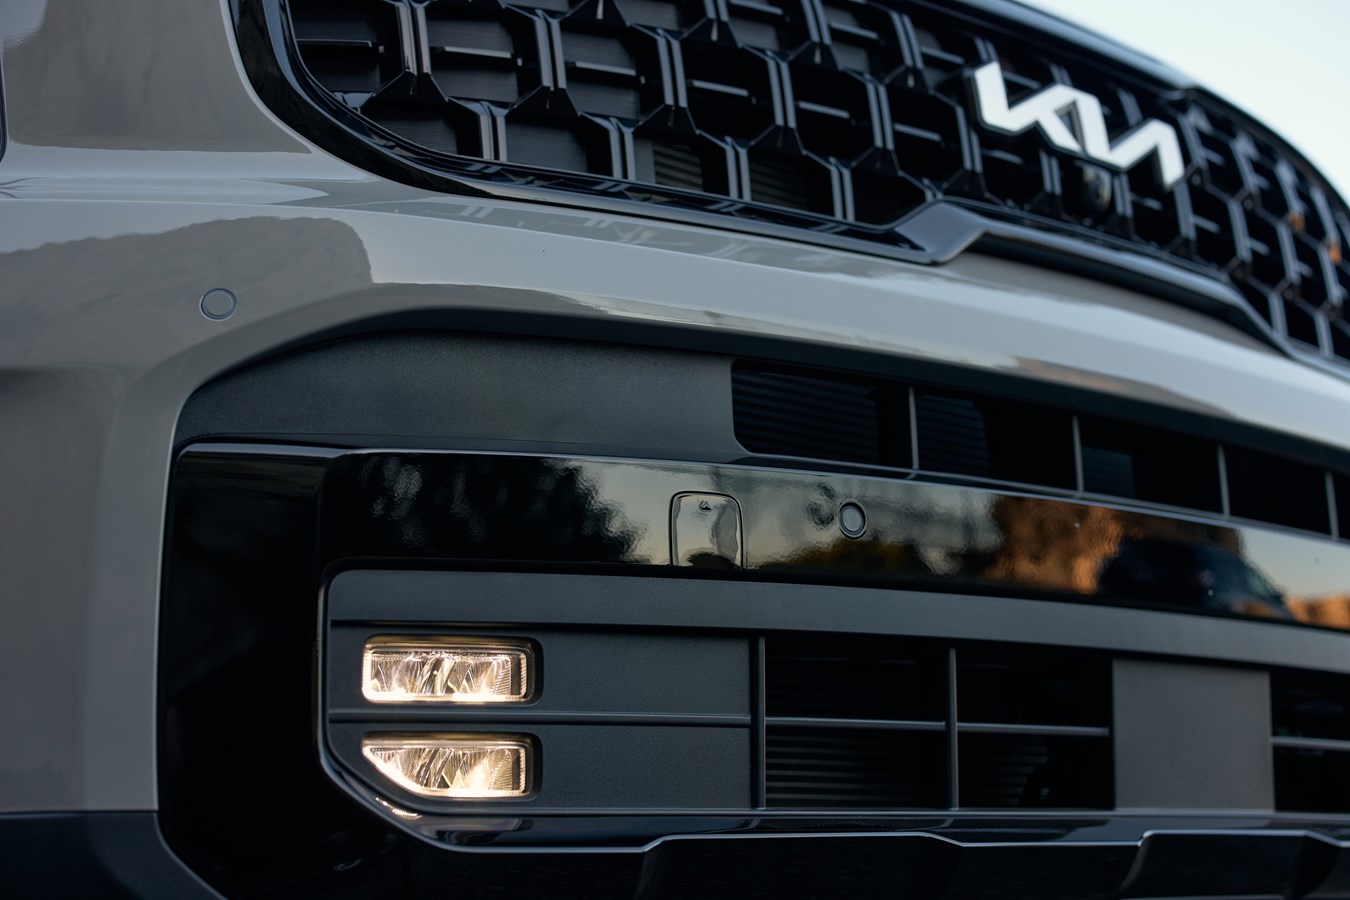 An aggressive front grille helps give the 2024 Kia Telluride an off-road exterior persona.